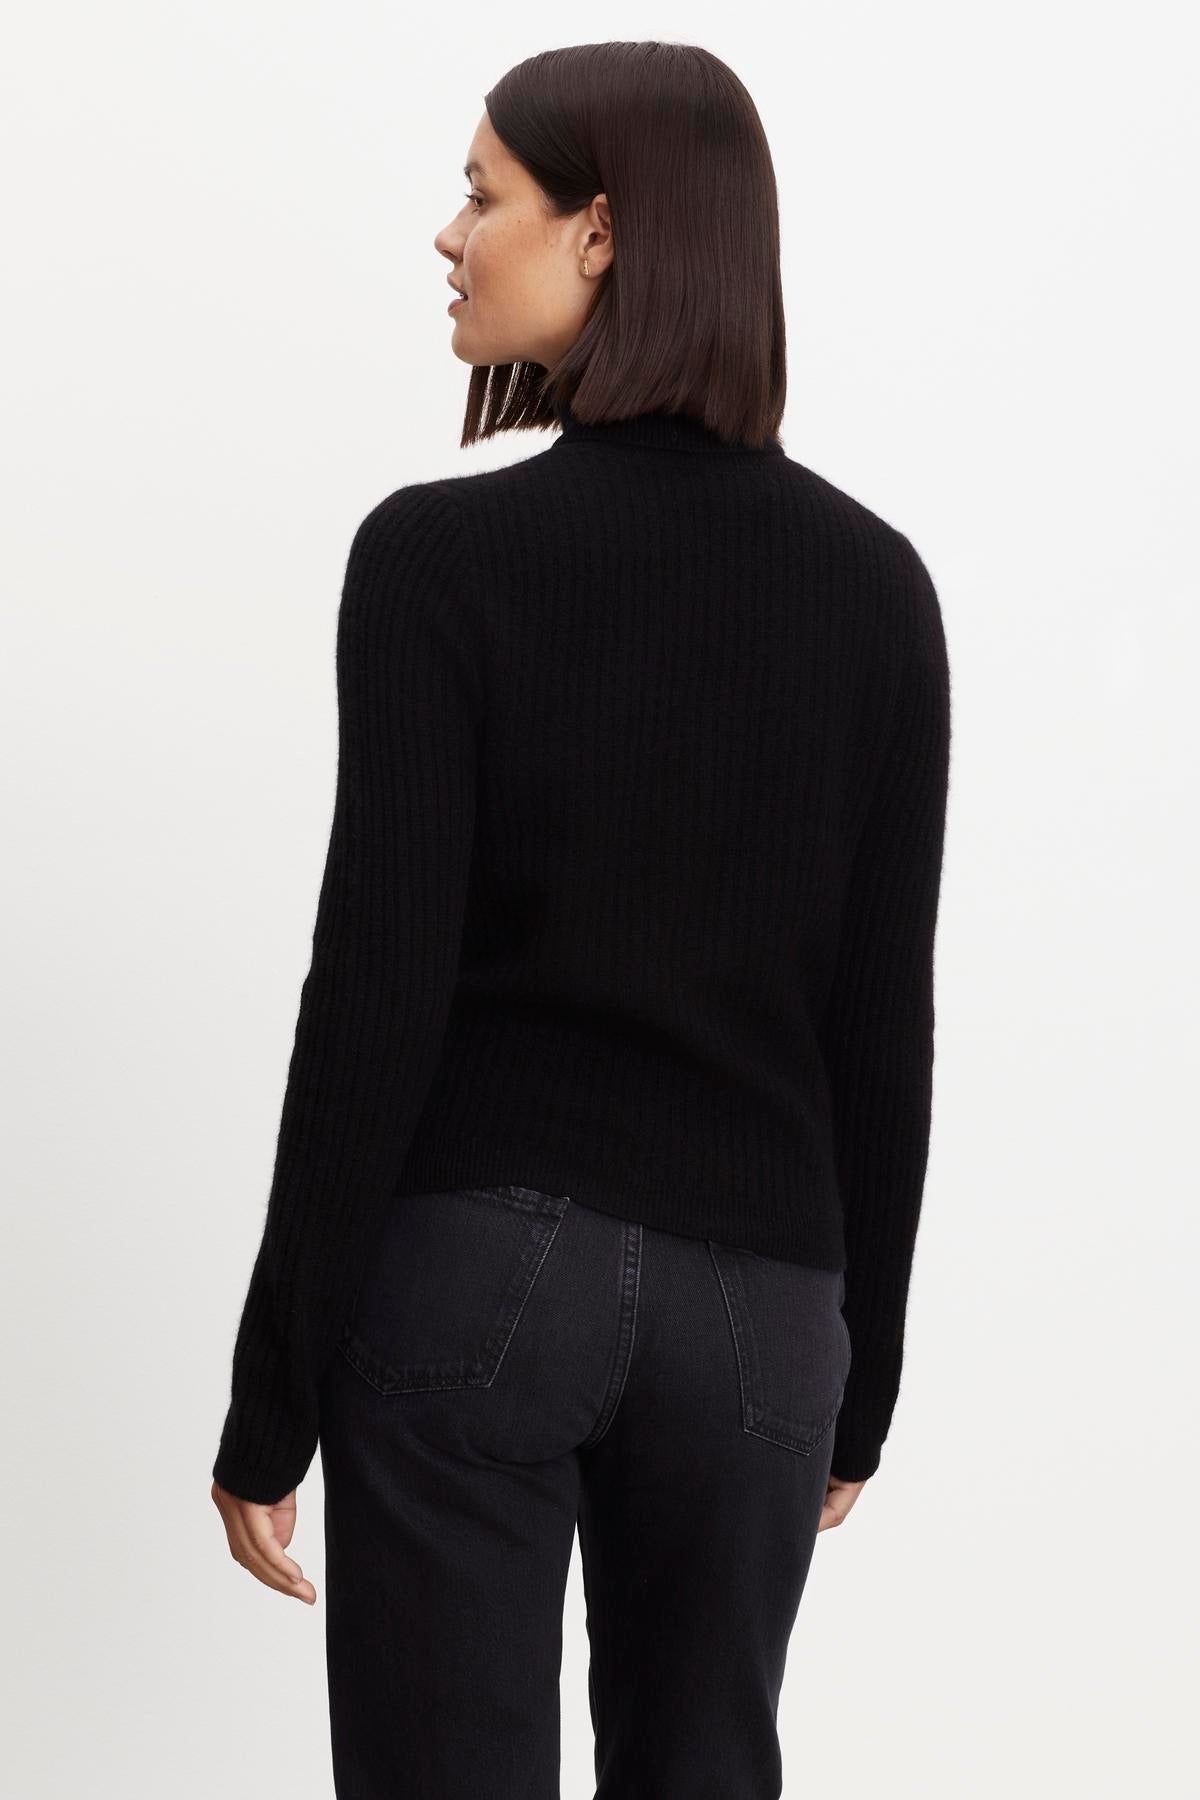 A woman in a Velvet by Graham & Spencer Lori Cashmere Turtleneck Sweater.-35696186654913